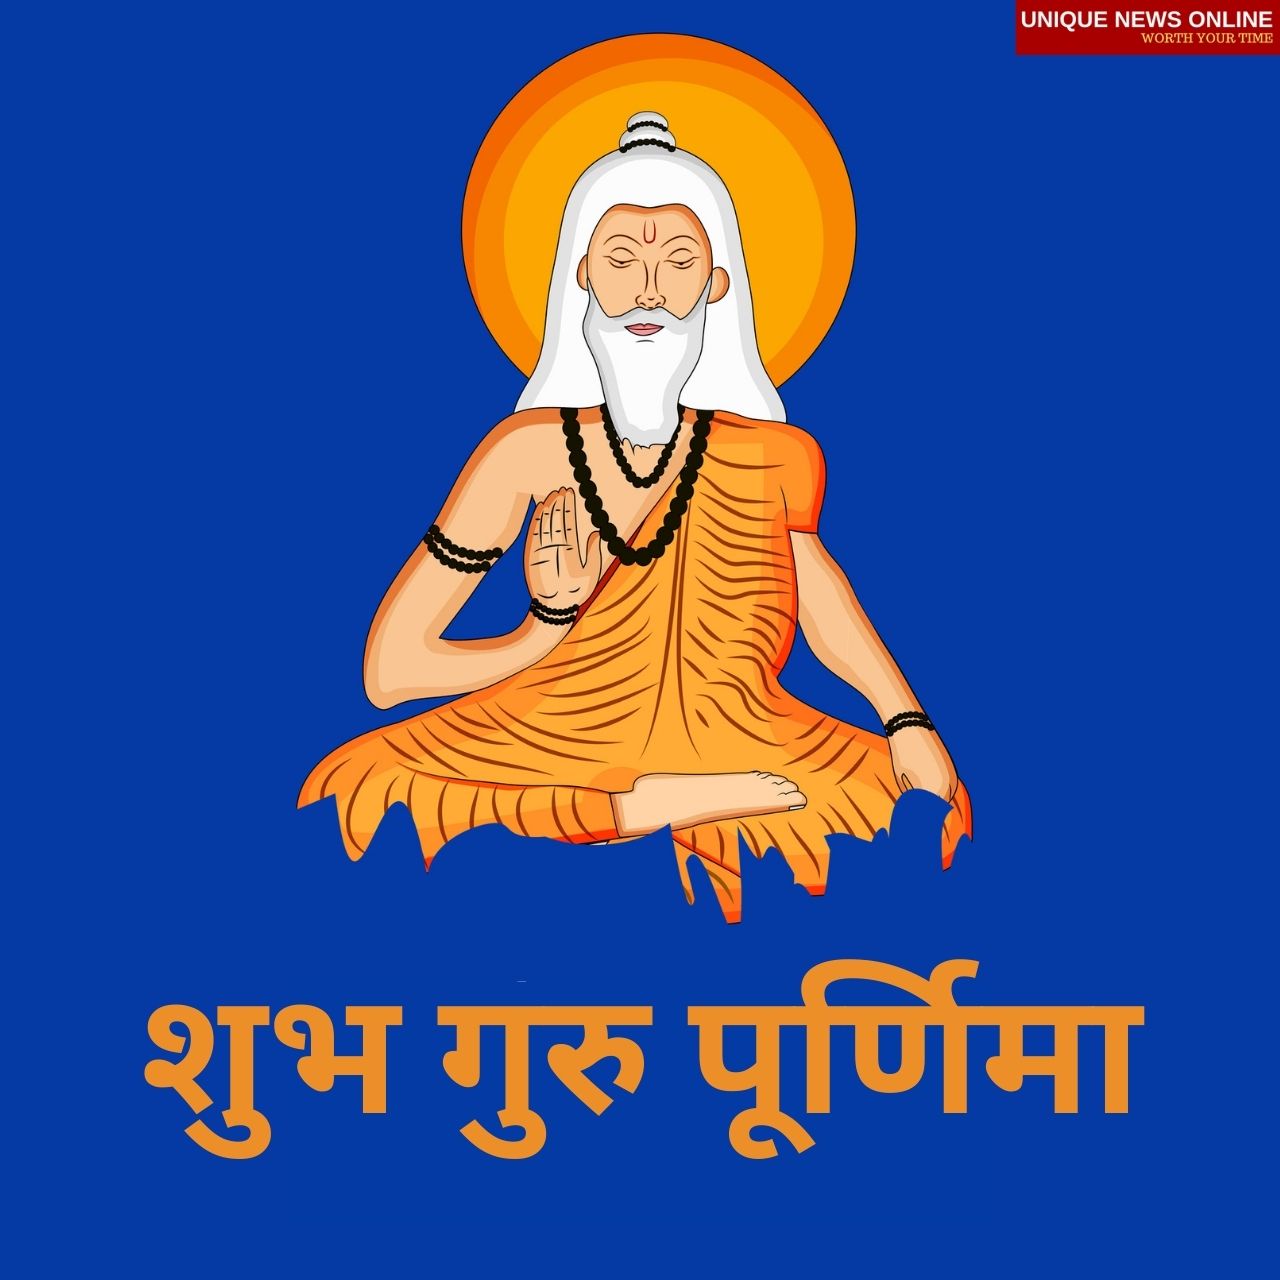 Guru Purnima 2021 Sanskrit Quotes, HD Images, Wishes, Status, Greetings,  and Messages to share